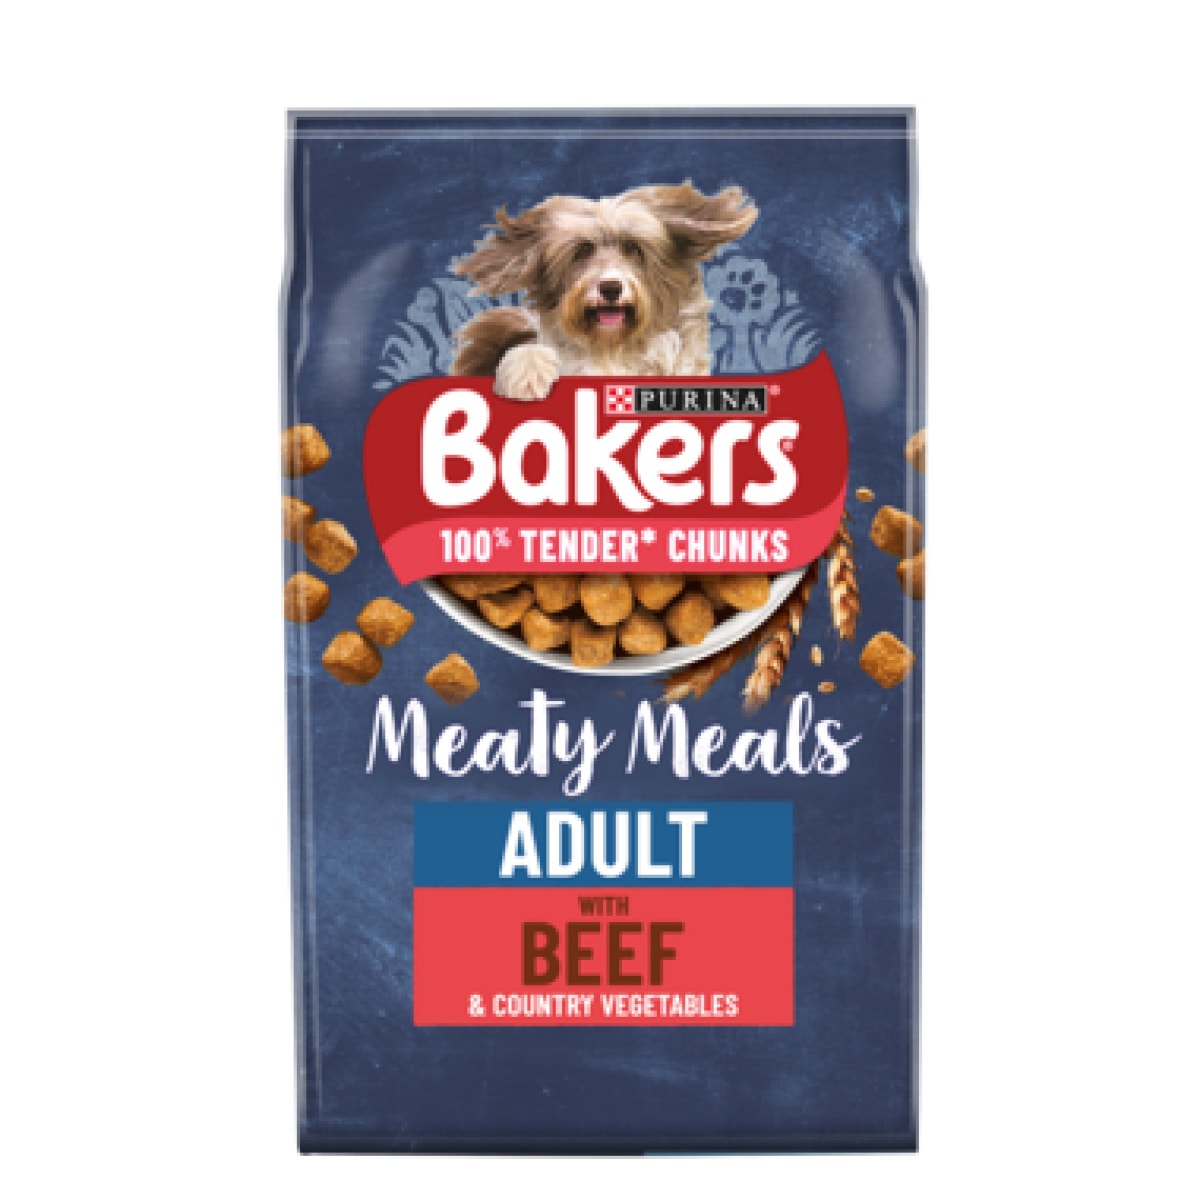 Bakers Meaty Meals Beef 2.7kg Main Image